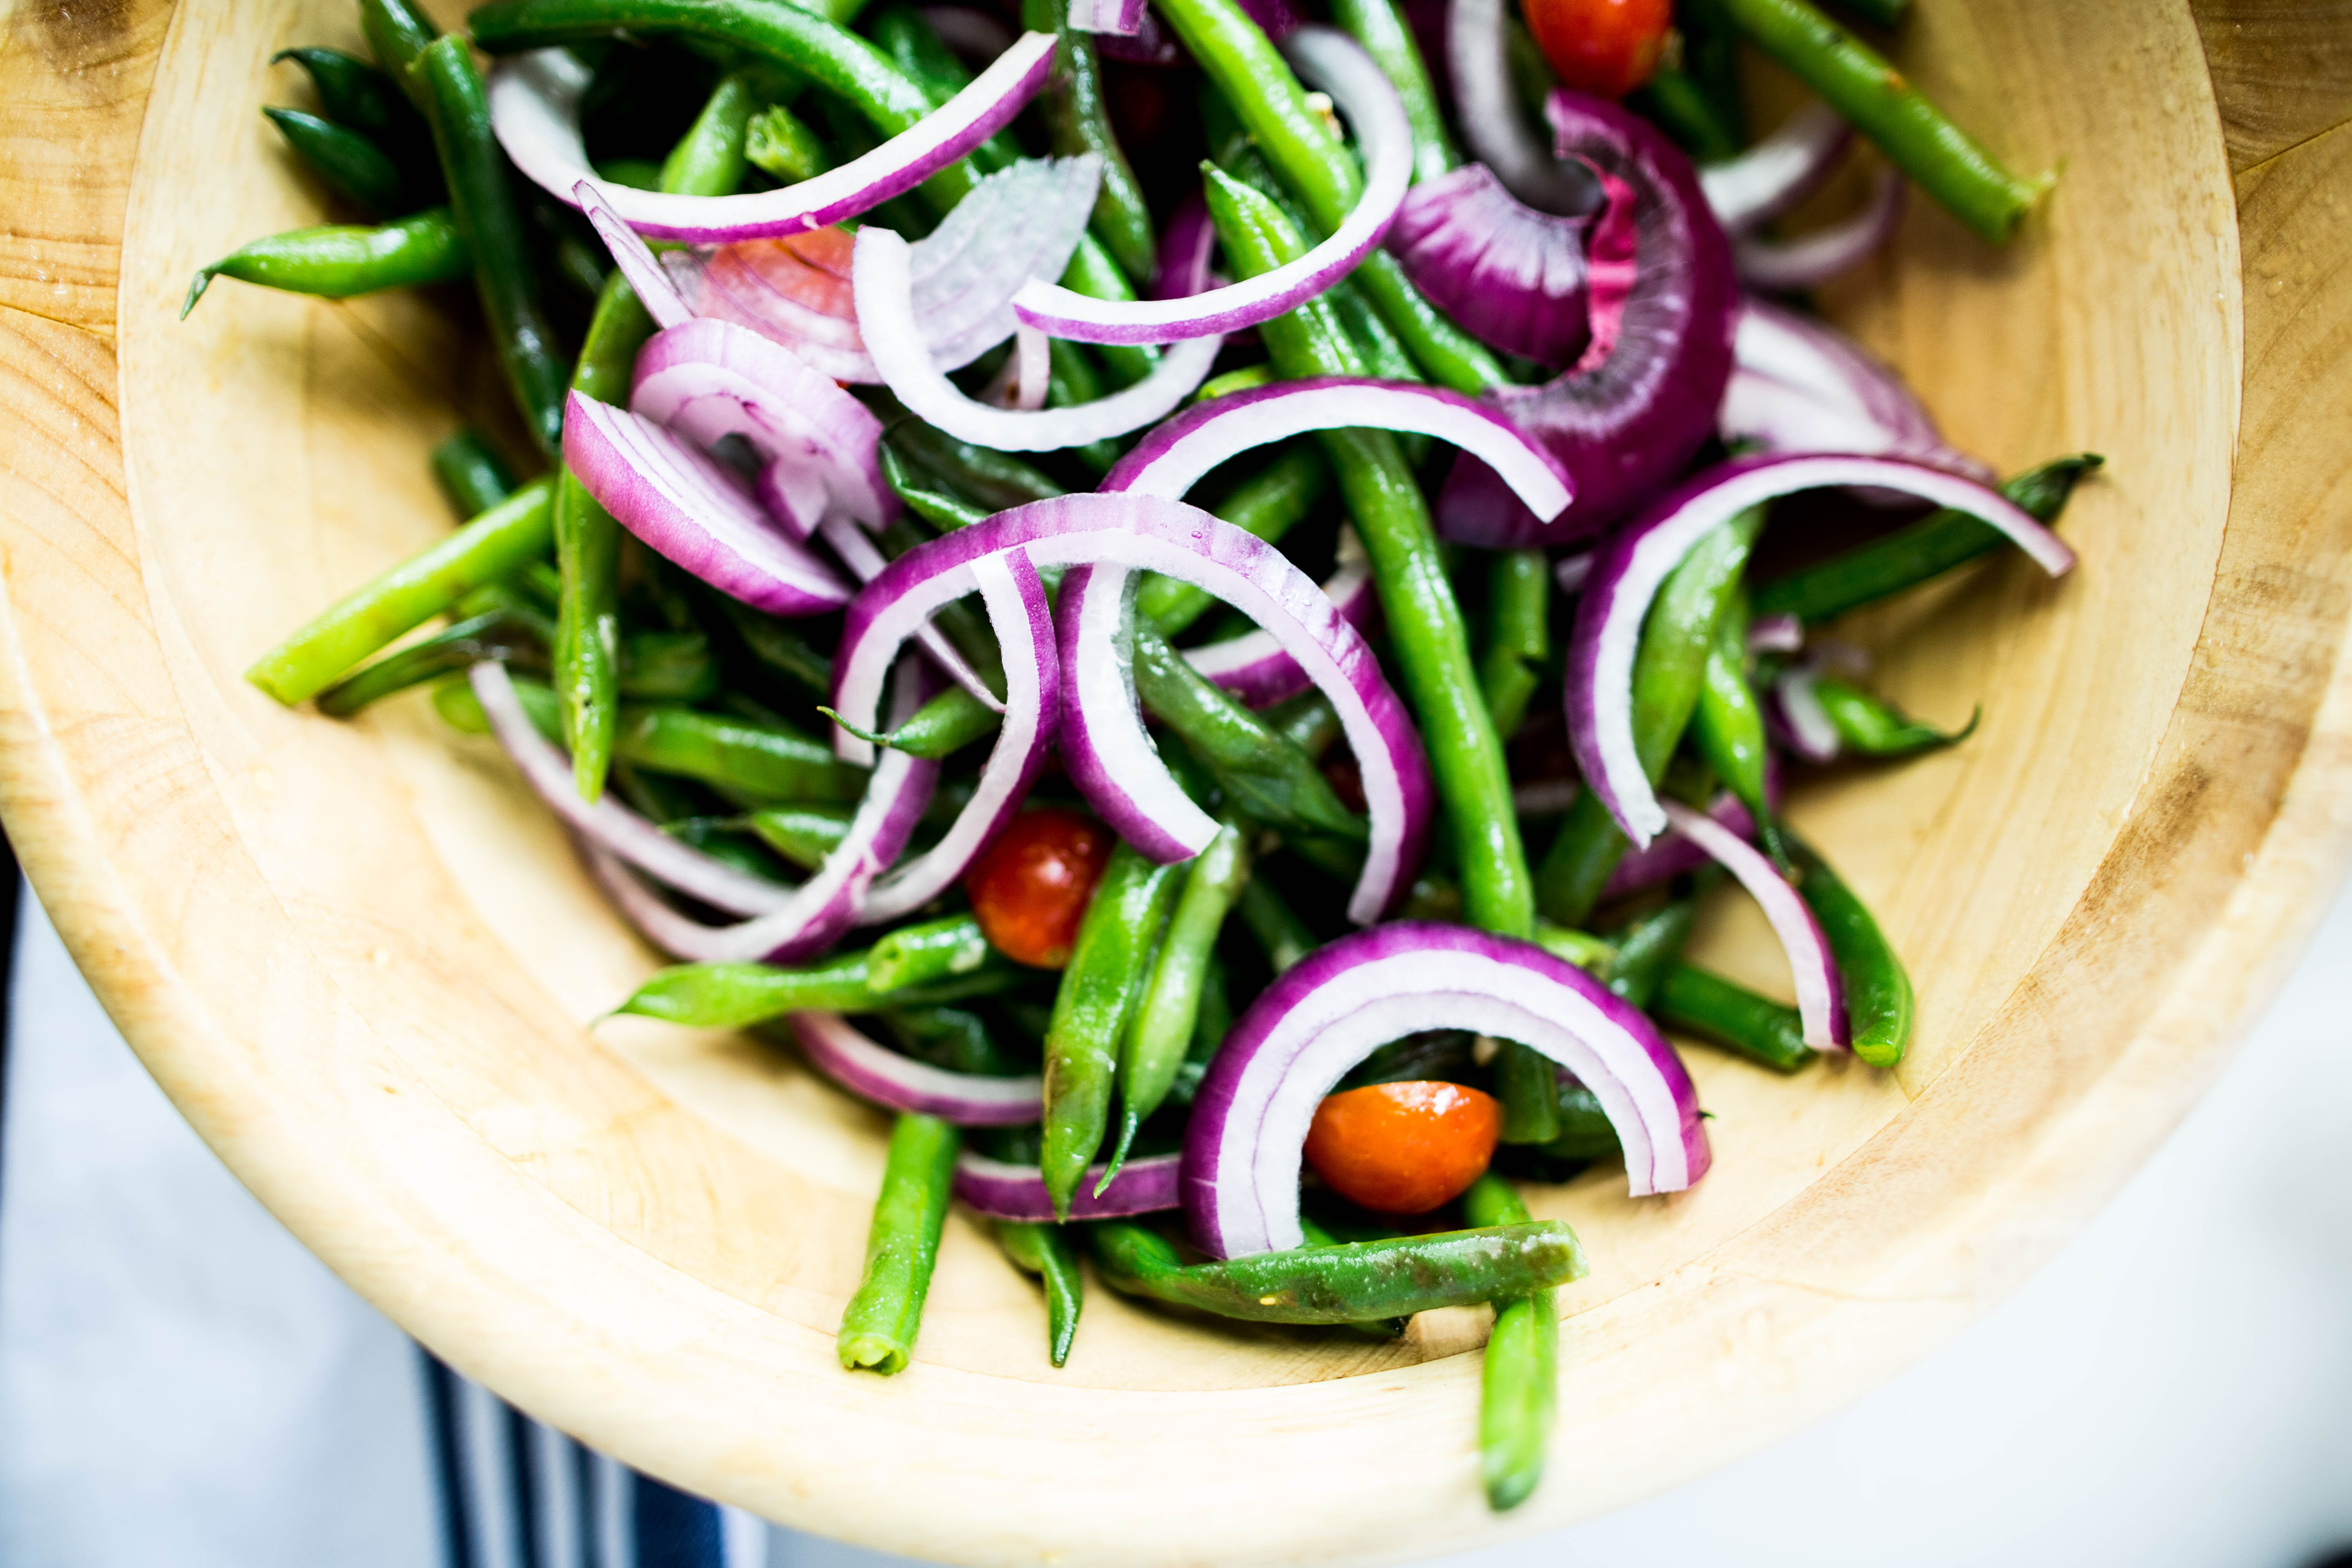 Green Bean Salad - With The Cowboy